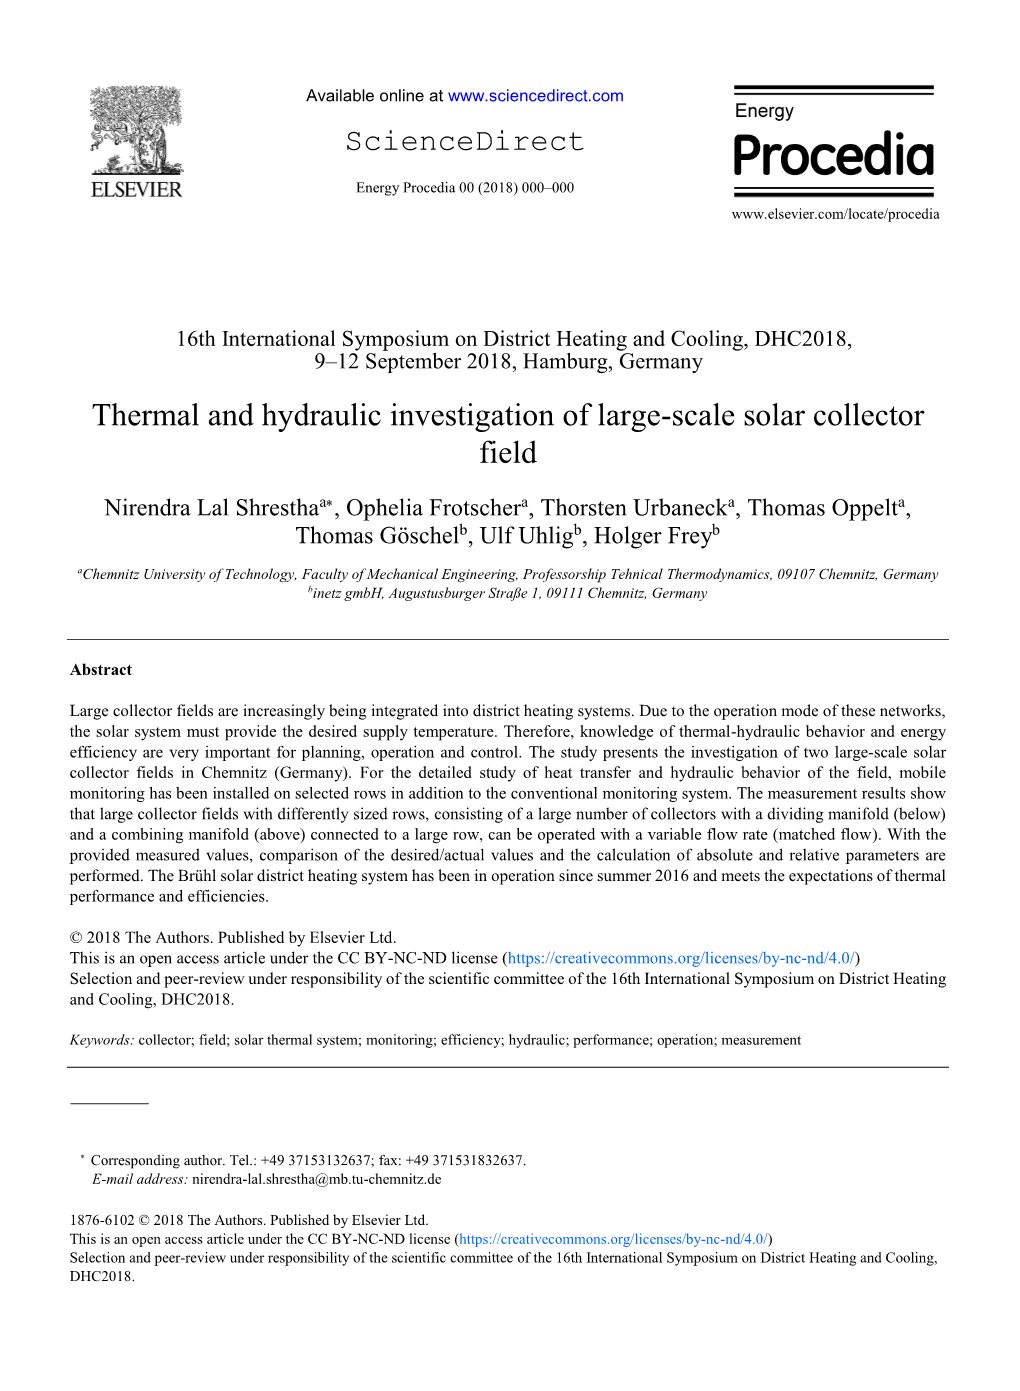 Thermal and Hydraulic Investigation of Large-Scale Solar Collector Field